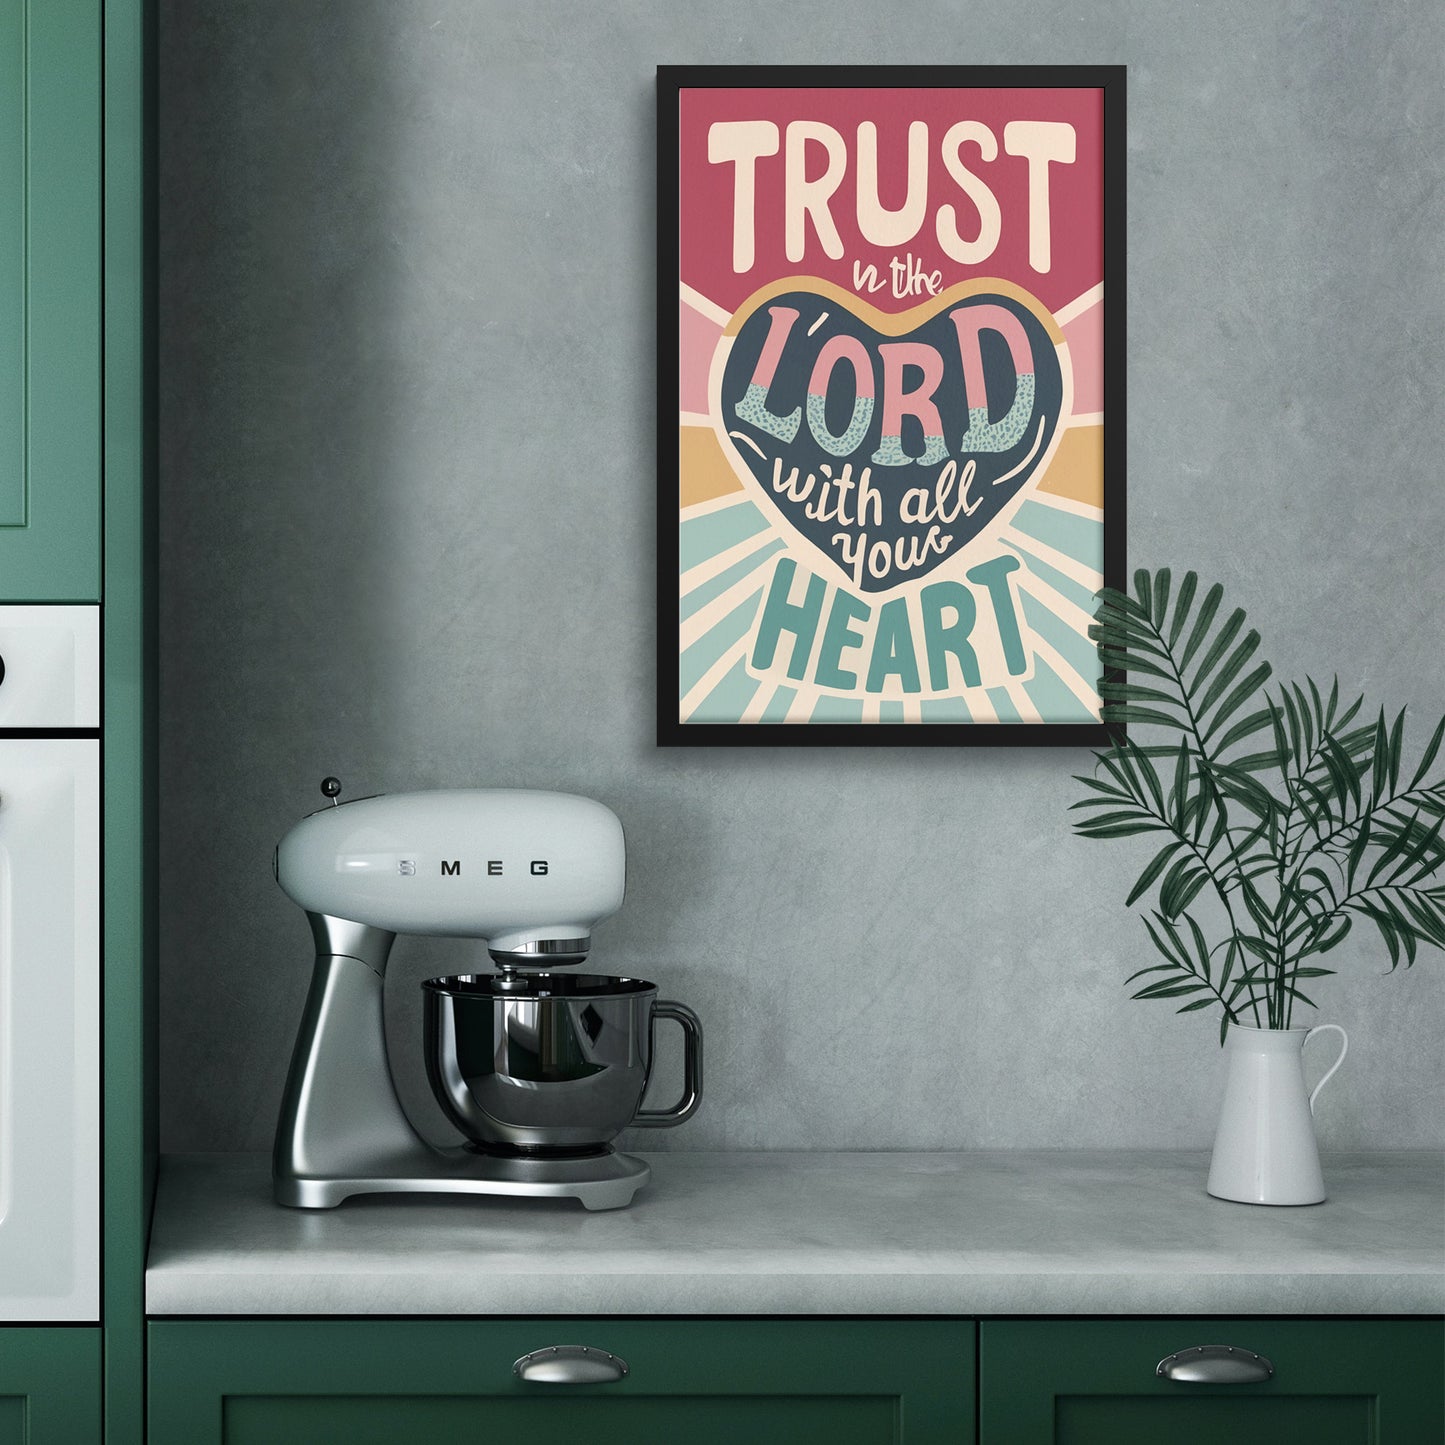 Trust in the Lord with All Your Heart Retro Style Framed Print